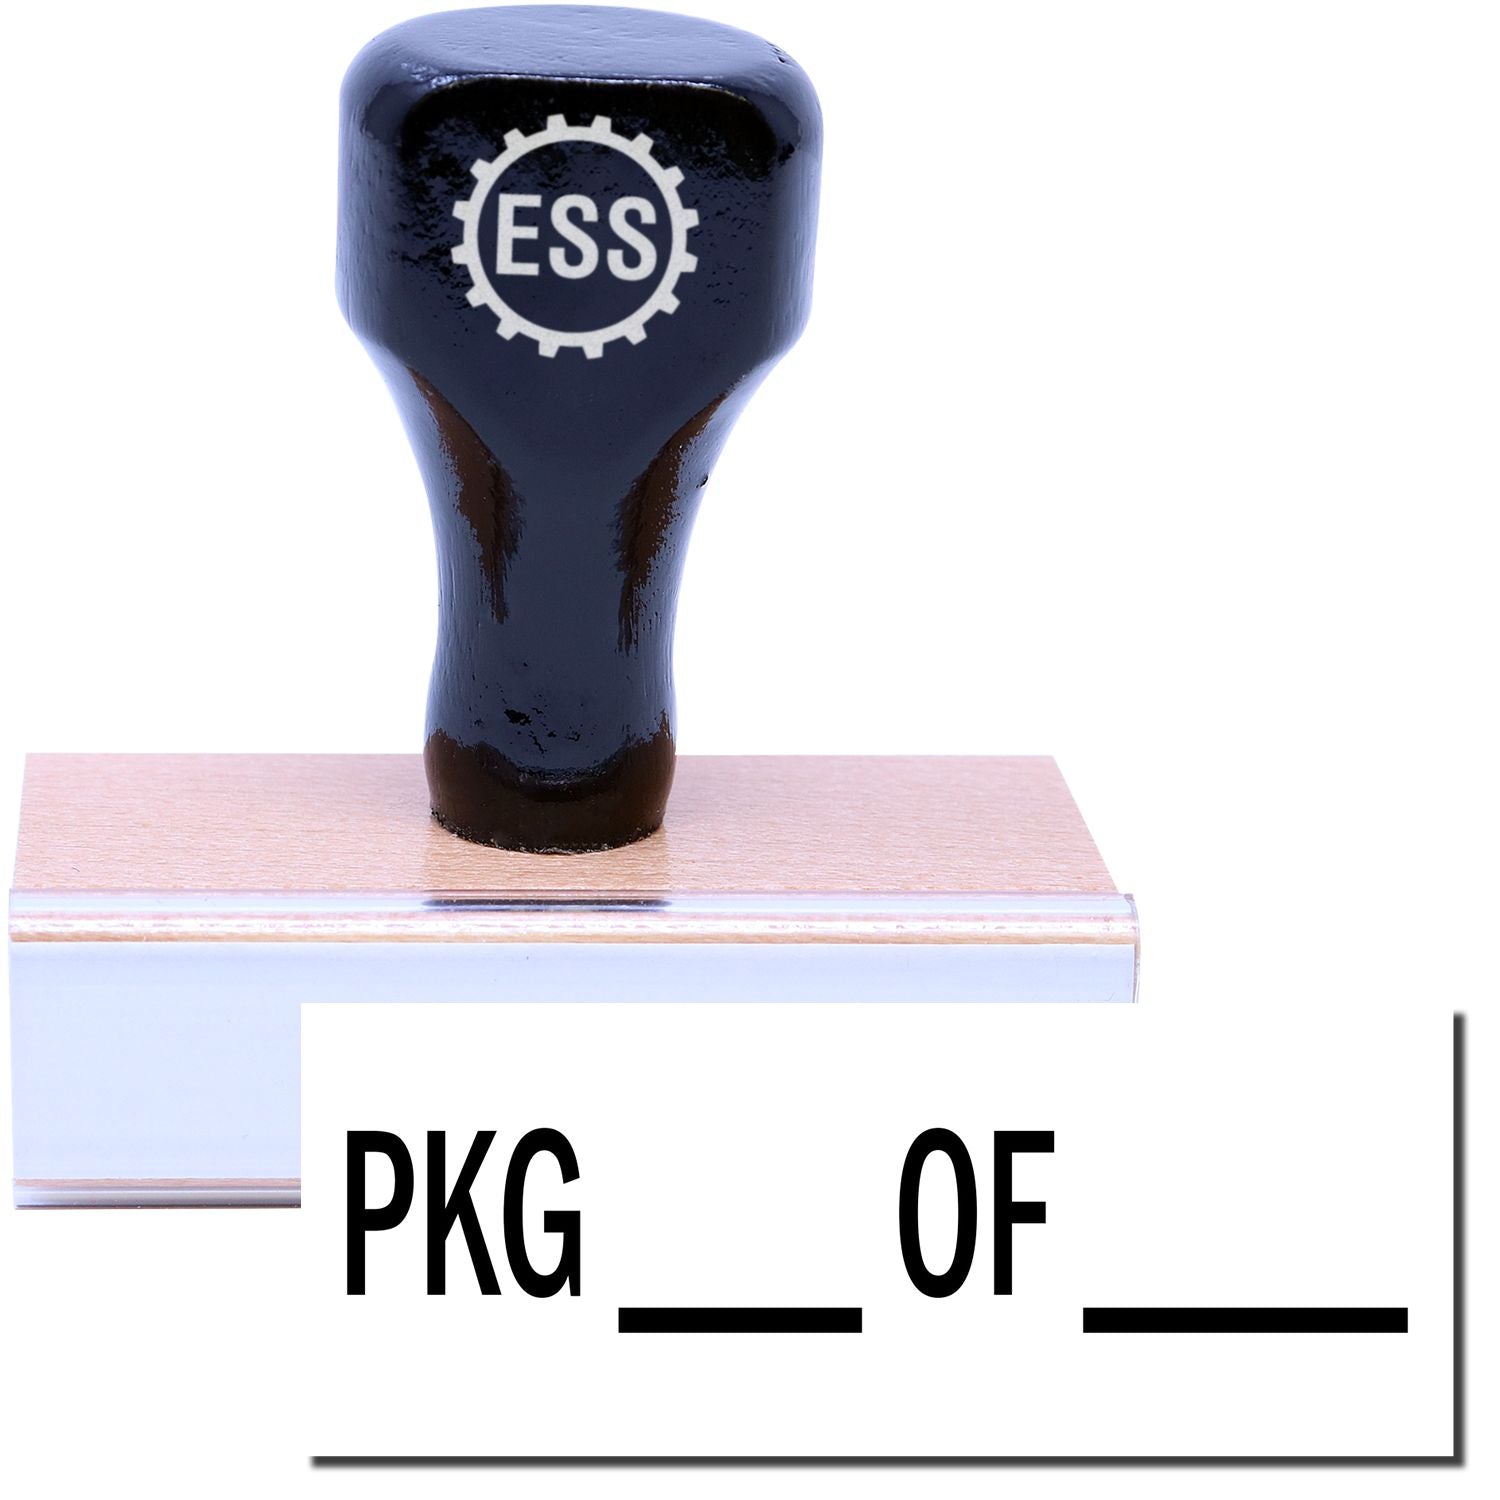 A stock office rubber stamp with a stamped image showing how the text "PKG ___ OF ____" in a large font is displayed after stamping.